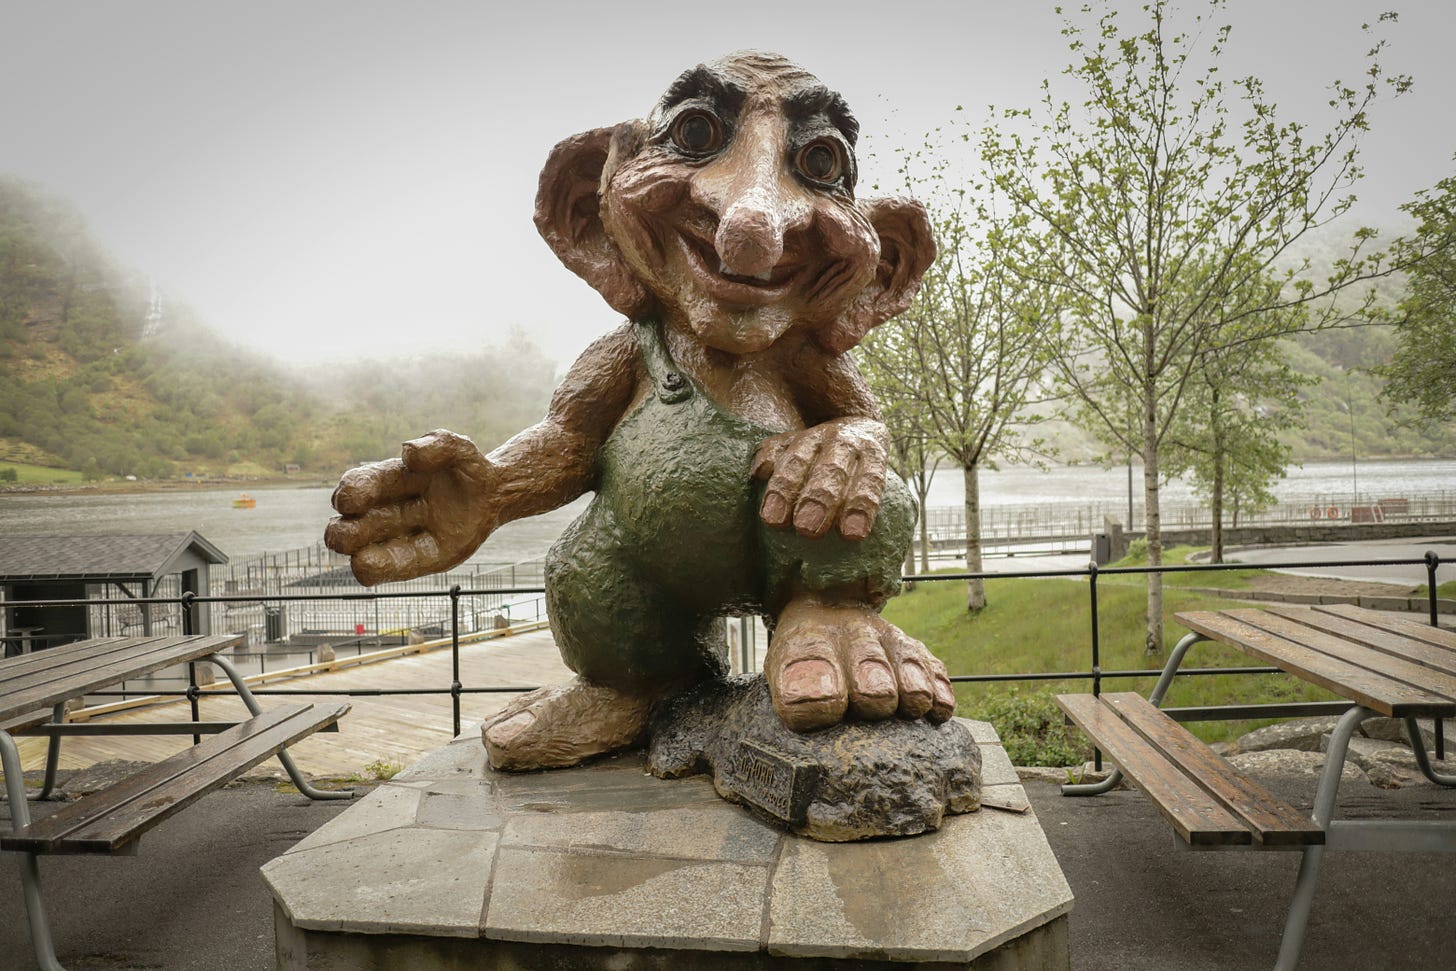 A statue of a troll sits in a park.